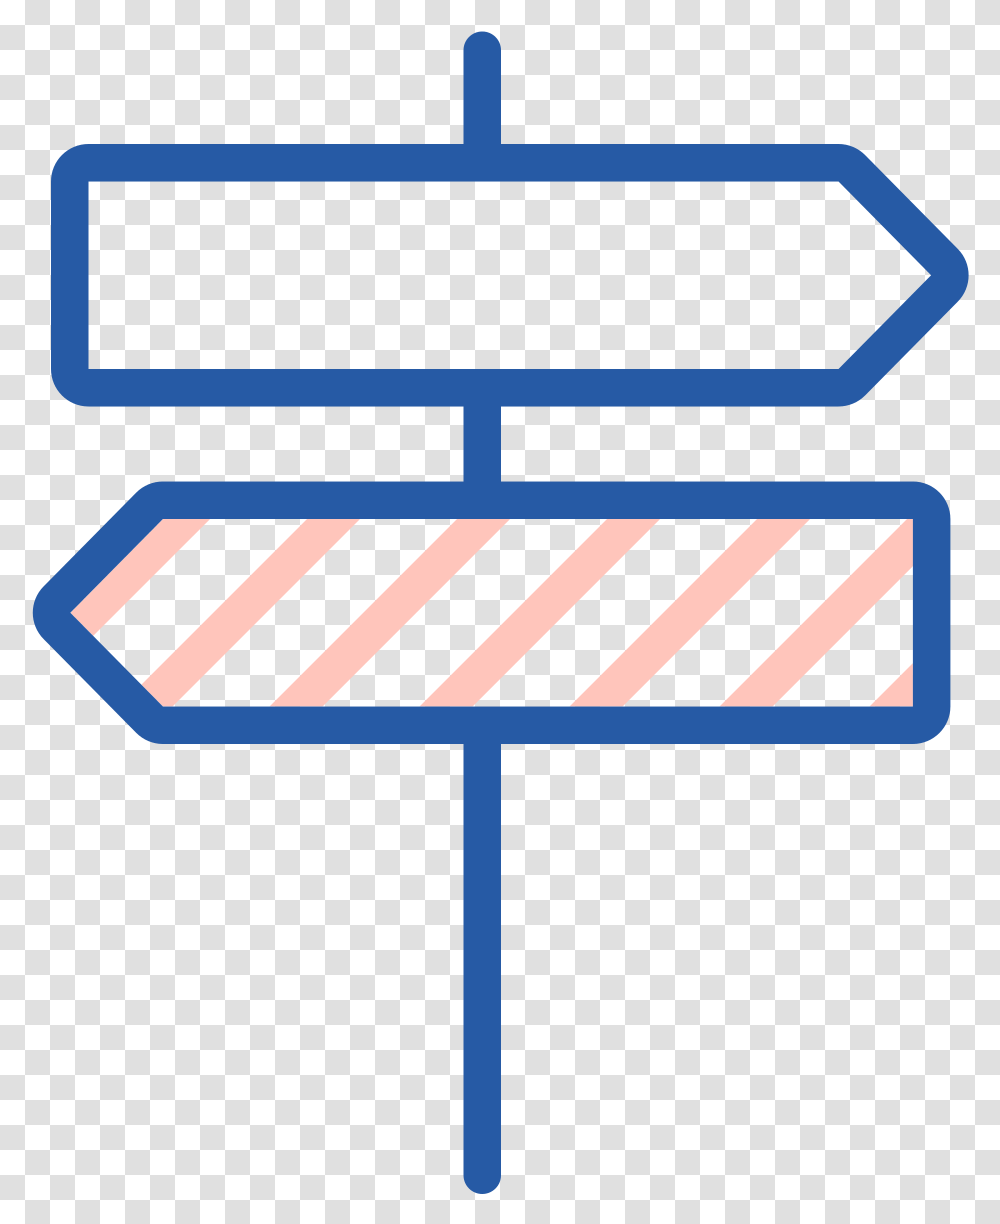 Filetoicon Iconhatchdirectsvg Wikimedia Commons Horizontal, Symbol, Sign, Fence, Road Sign Transparent Png